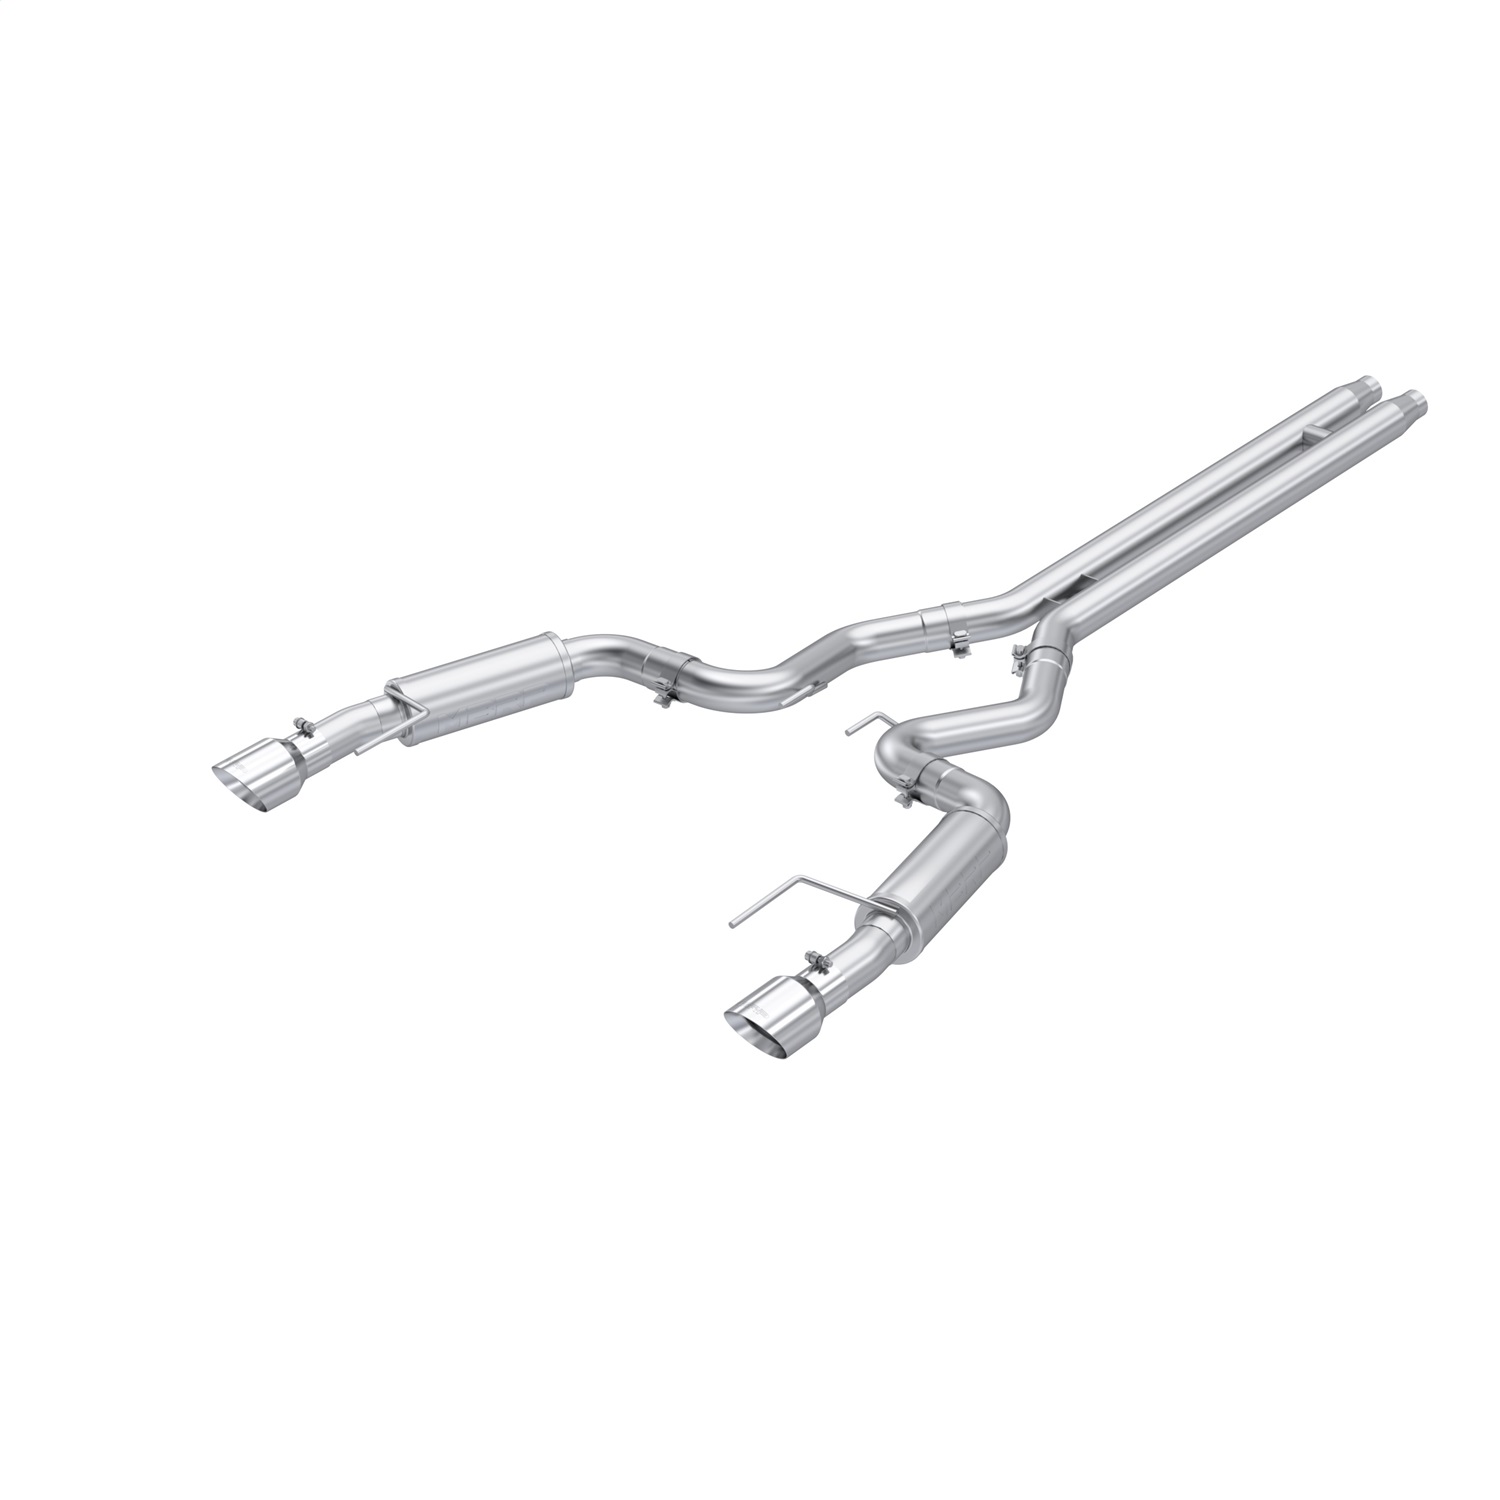 MBRP Exhaust S7253AL Armor Lite Cat Back Exhaust System Fits 24 Mustang